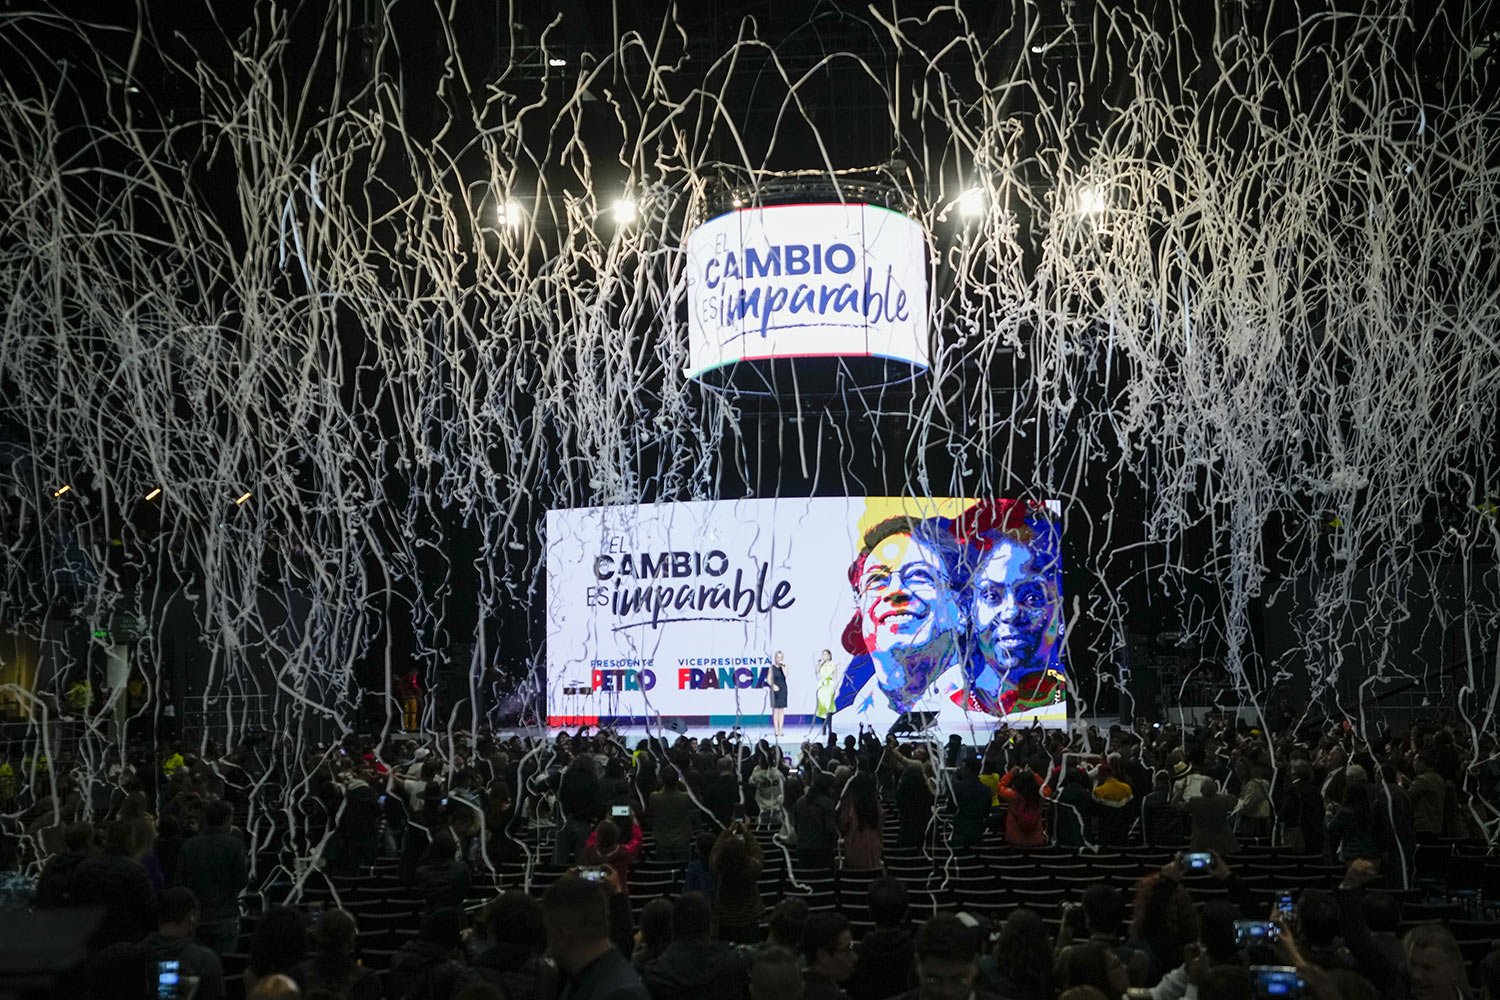  Confetti showers supporters at the election night headquarters of Gustavo Petro presidential candidate, in Bogota, Colombia, Sunday, June 19, 2022. Colombia will be governed by a leftist president for the first time after Petro narrowly defeated a r